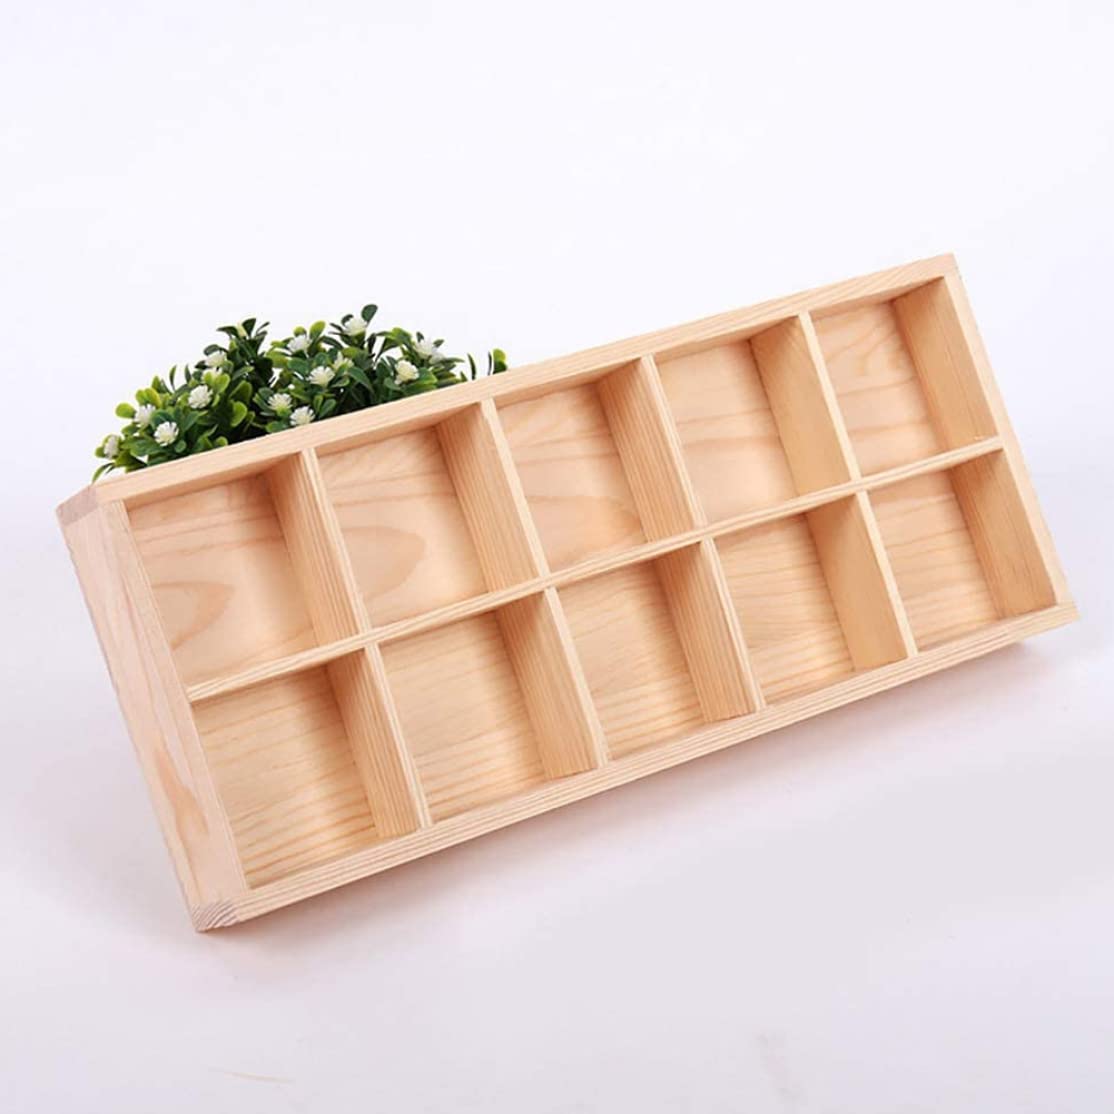 Rustic Compartments Wooden Divided Boxes Succulents Flower Pot Desktop Storage Box Holder, Wood Display Tray for Crafts, Jewelry (10 Grids)